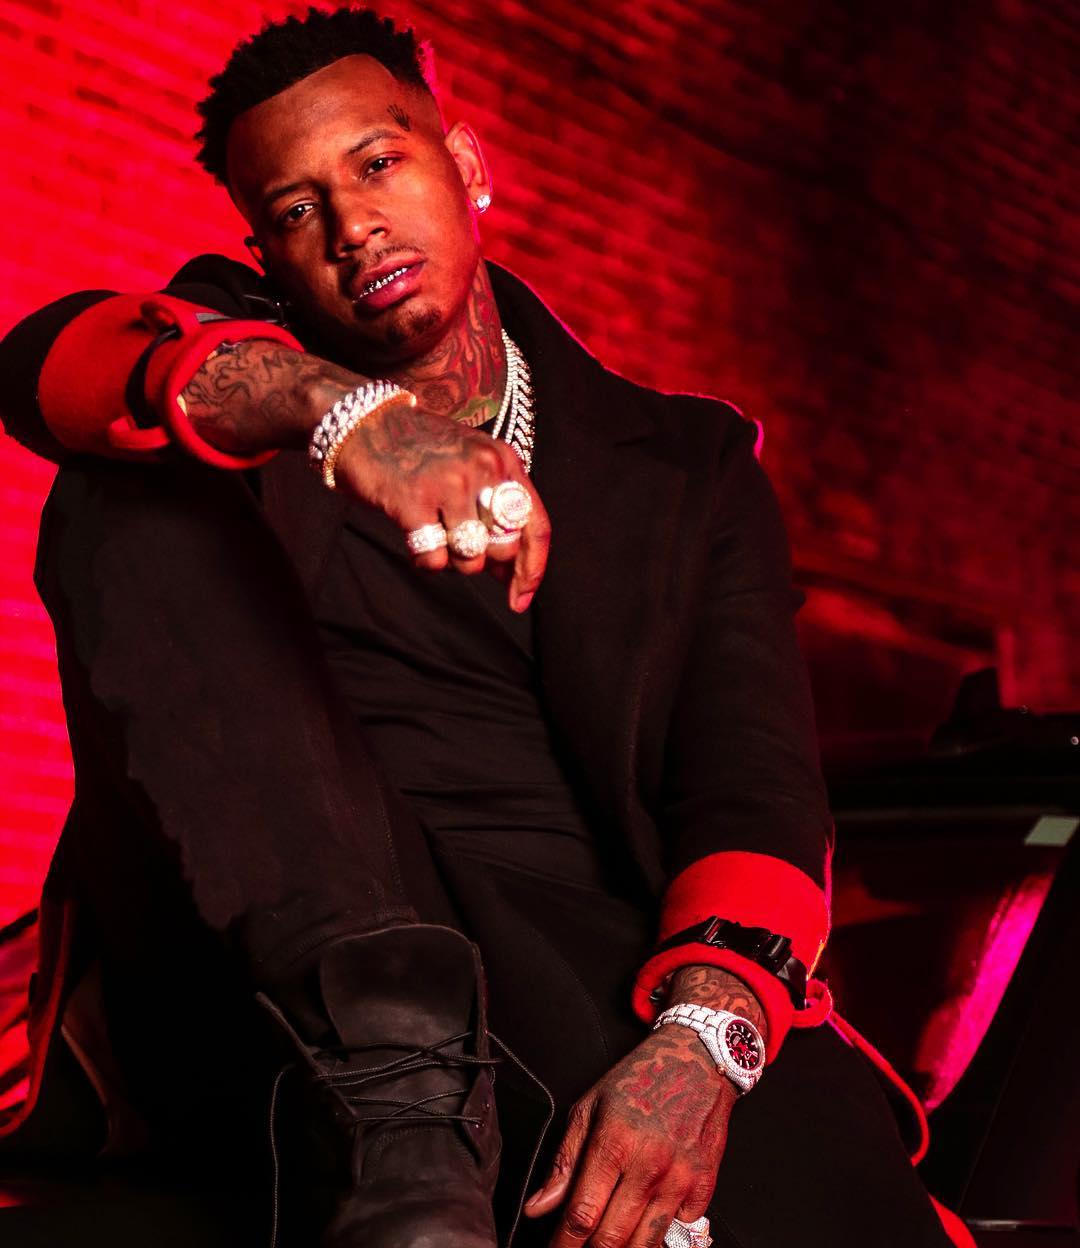 Memphis rapper Moneybagg Yo returns today with a new track titled "...